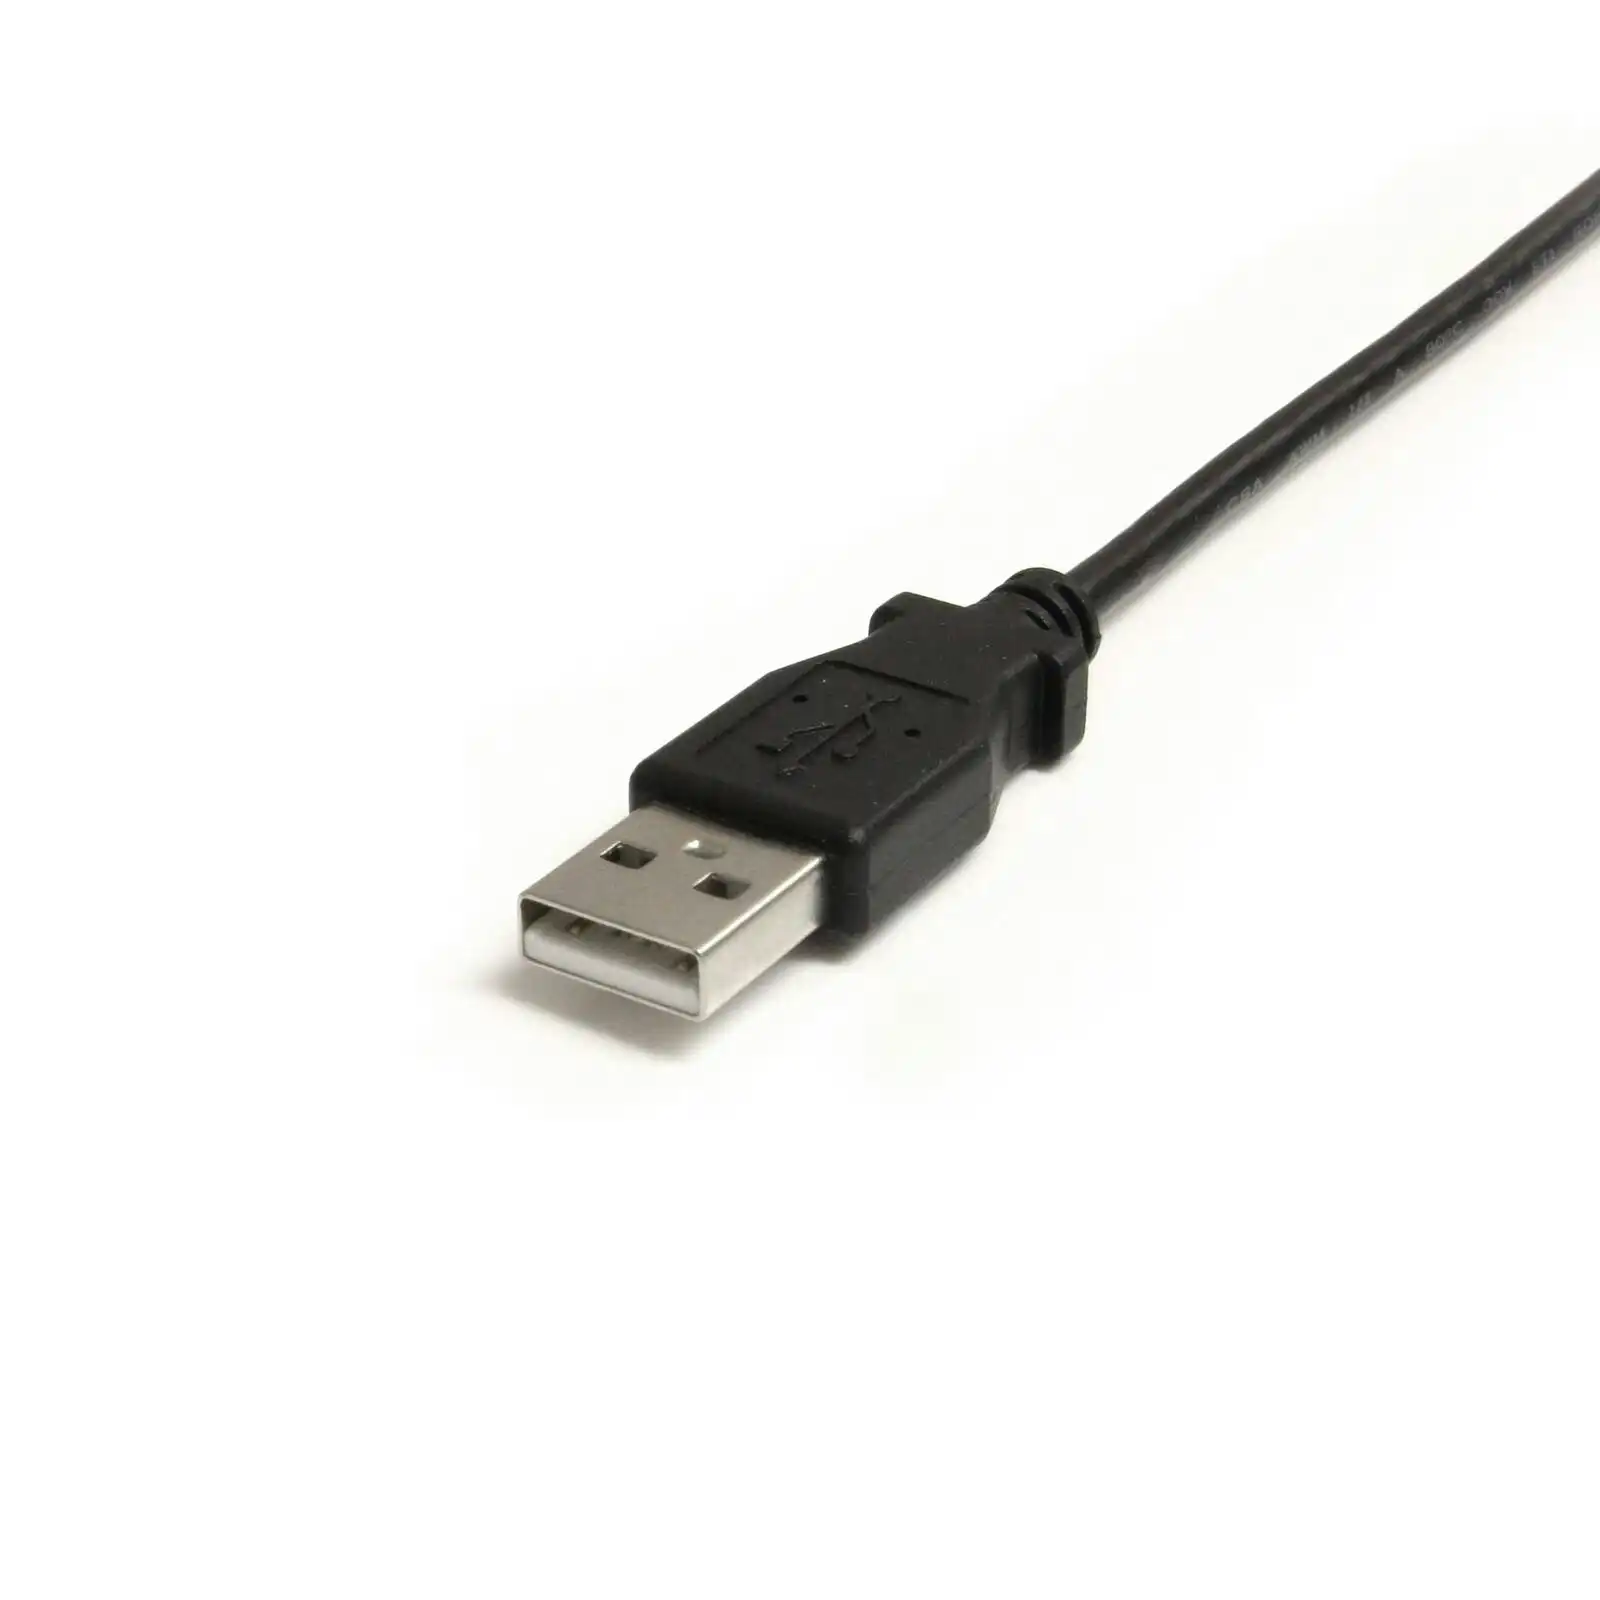 Star Tech 91cm Mini USB Sync/Charging Cable Right Angled - For Mobile Devices